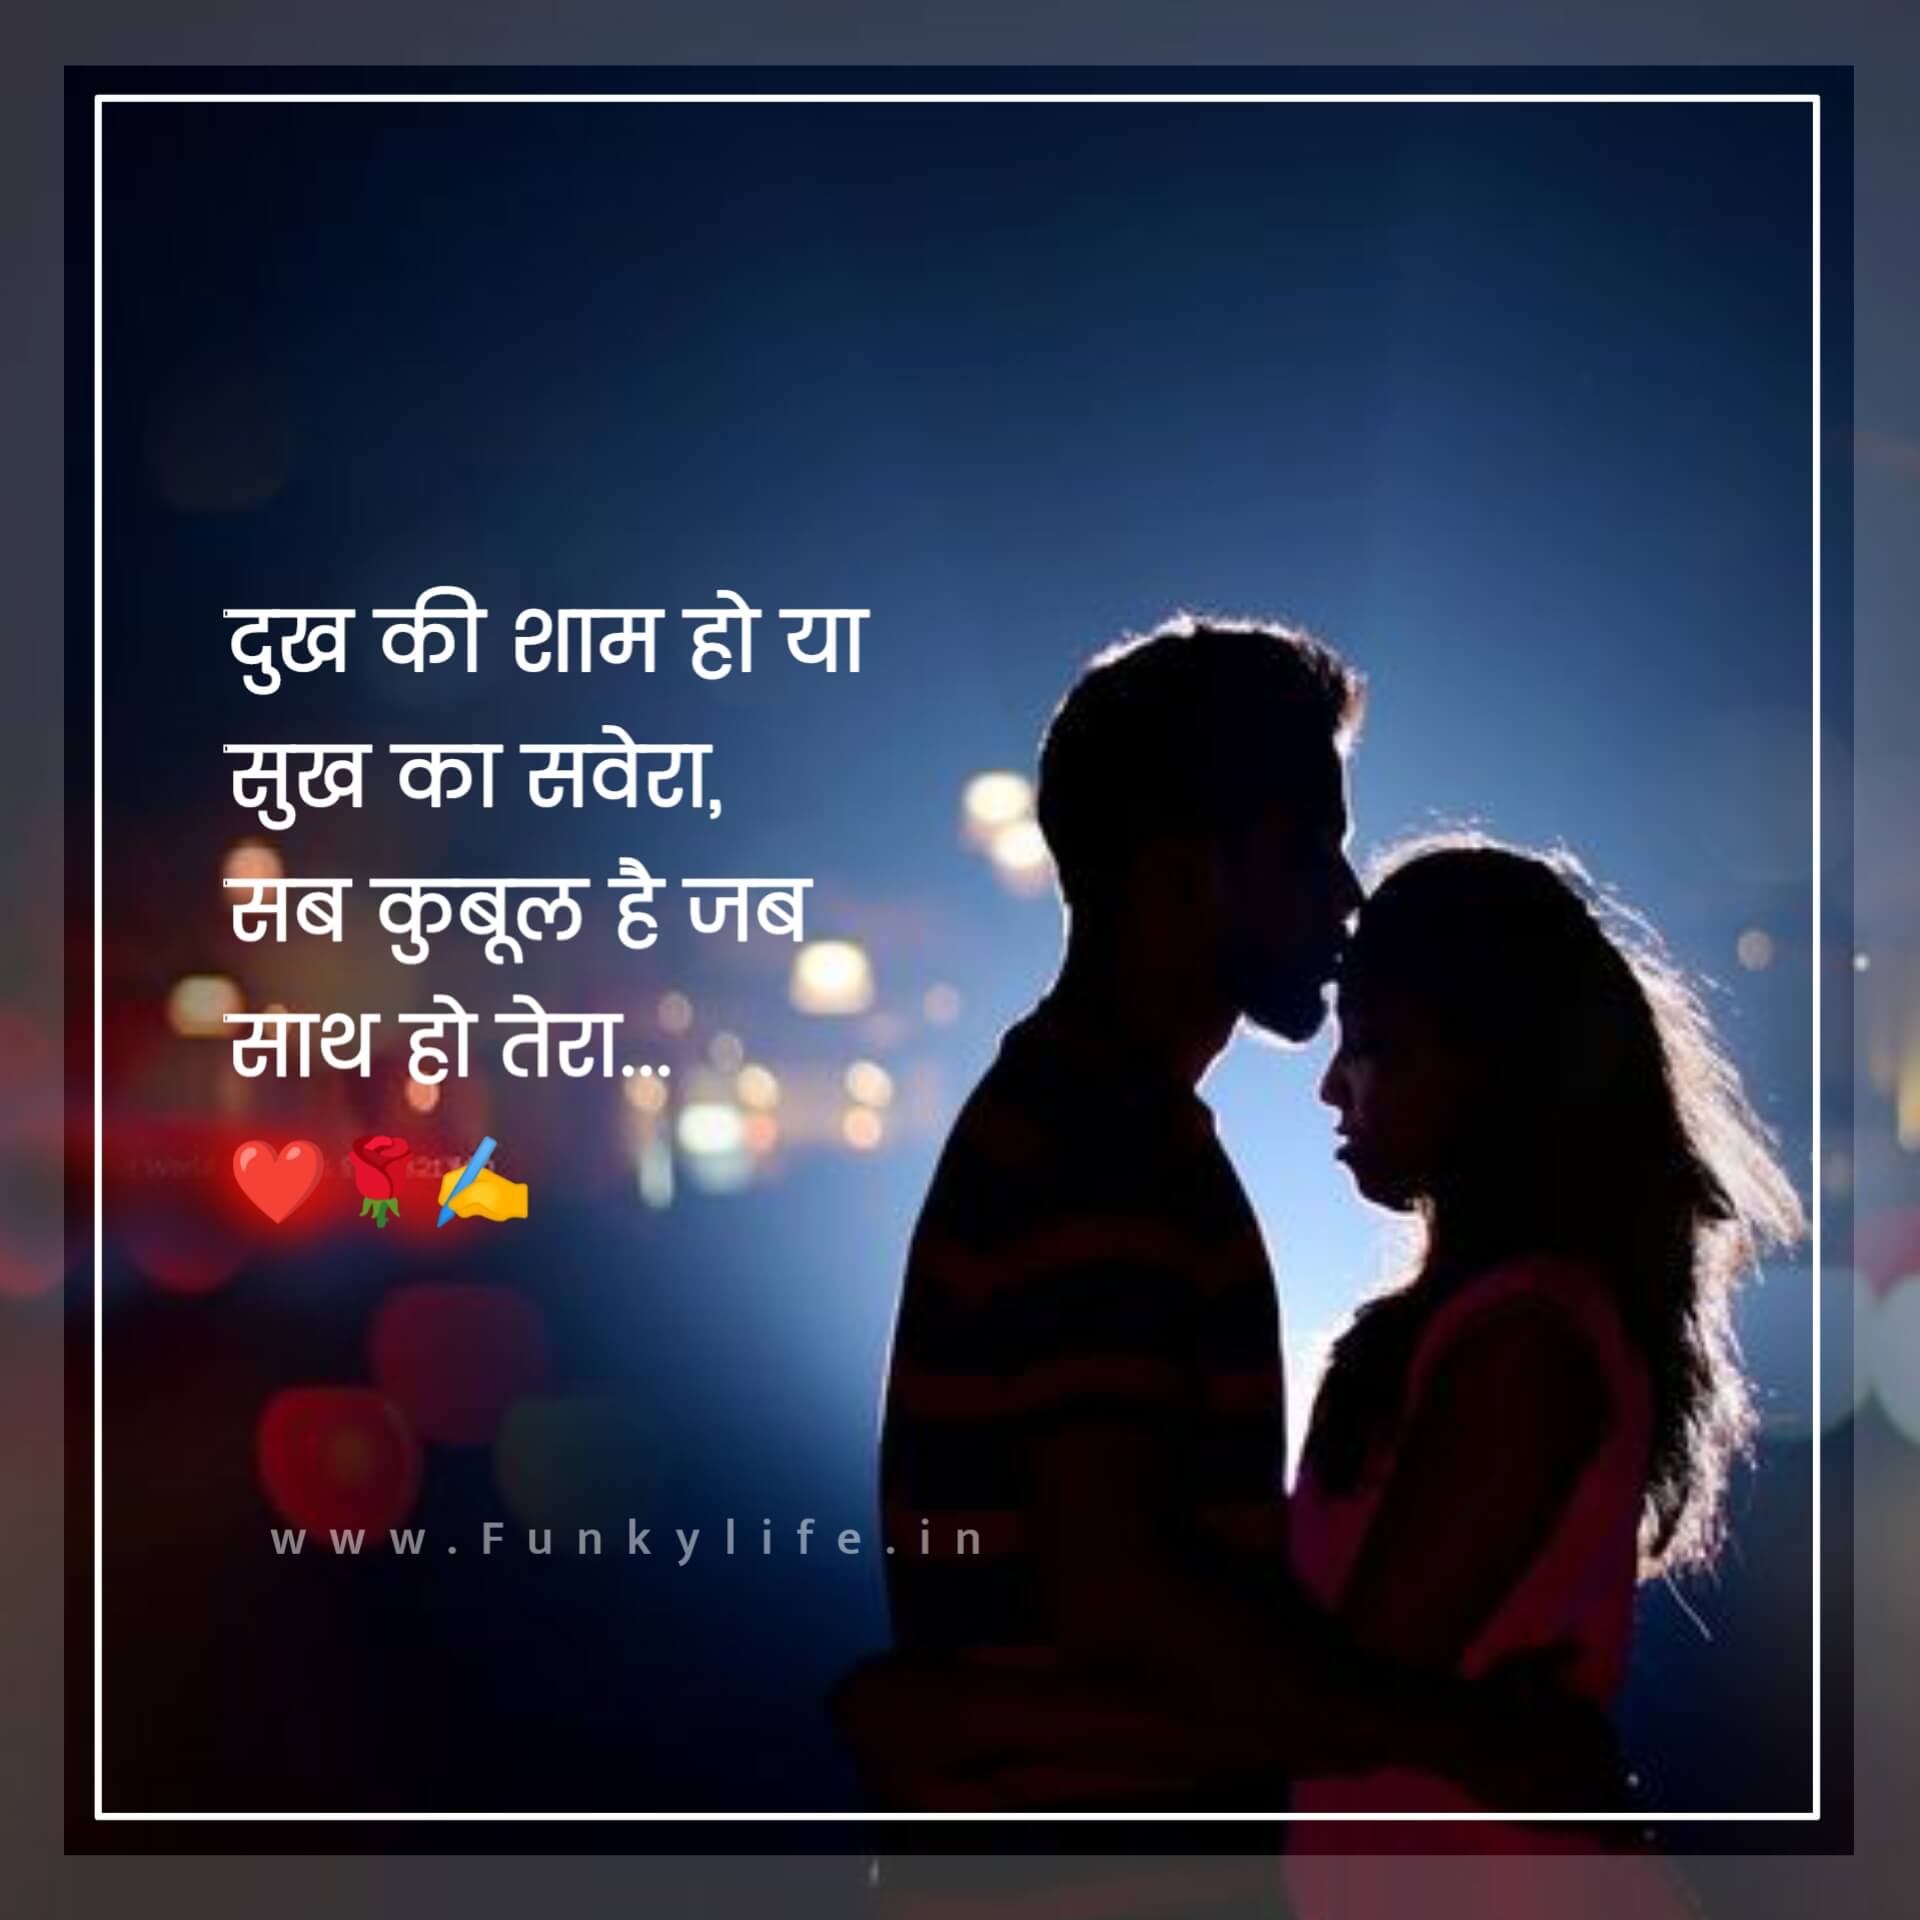 Love Quotes in Hindi For Her